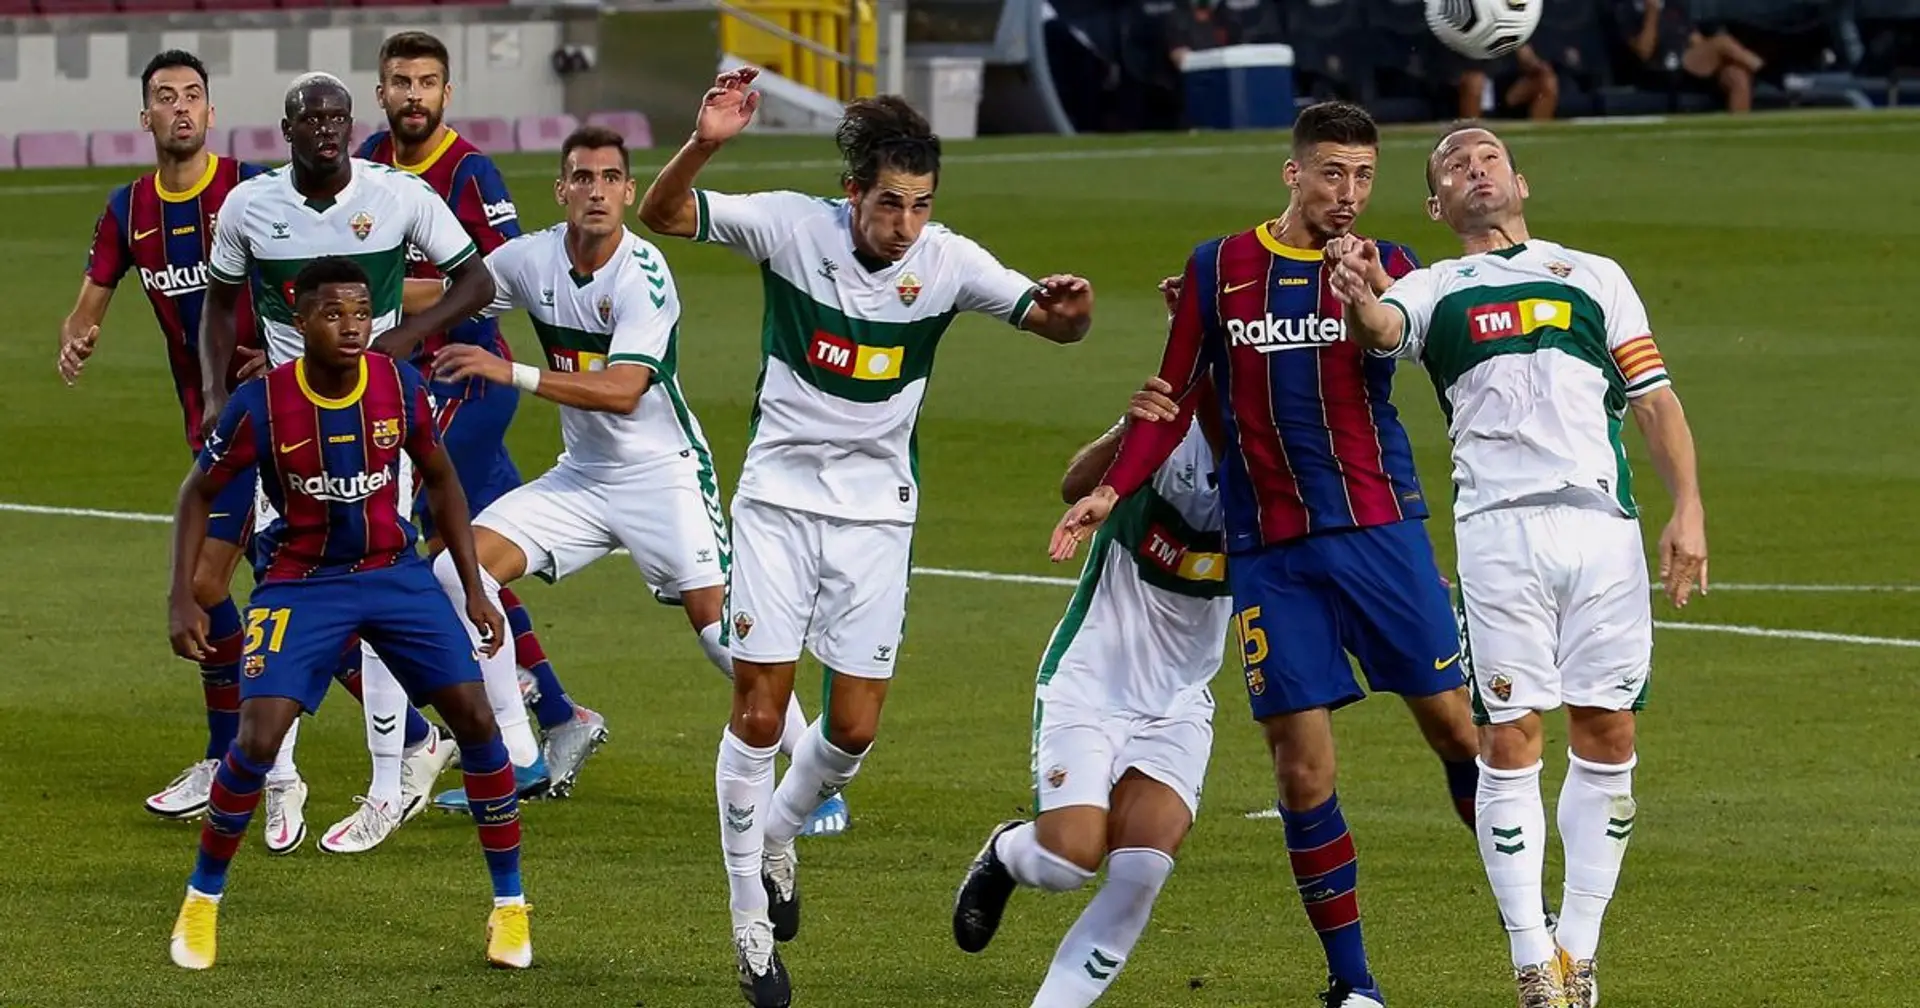 Barcelona vs Elche: team news, probable lineups, score predictions and more – preview